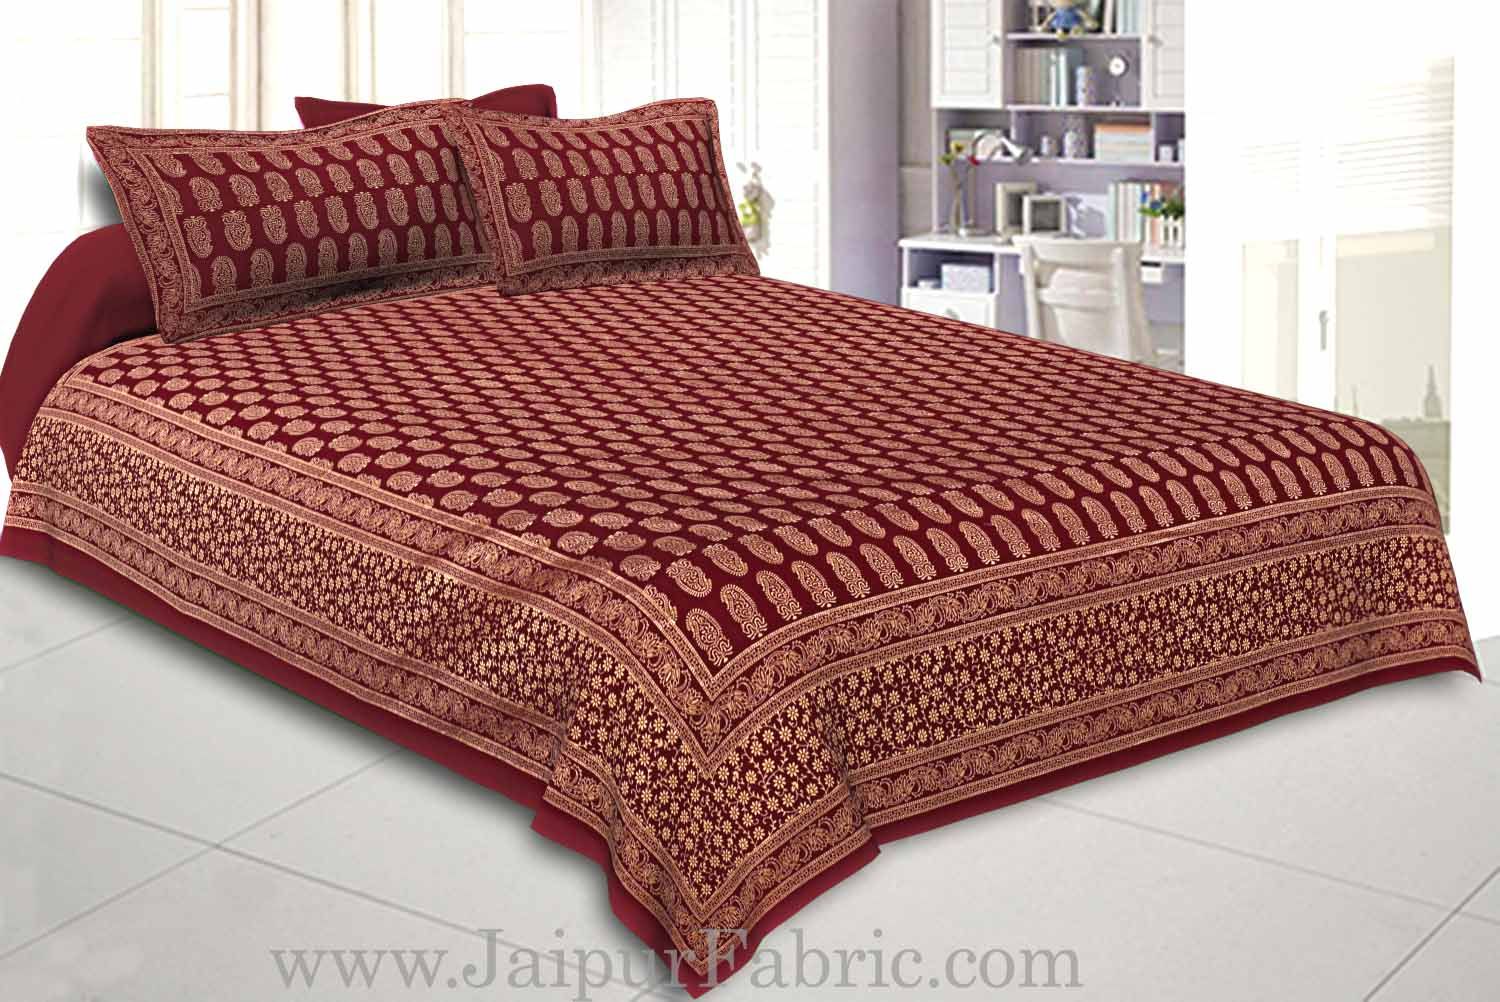 Double Bed Sheet With Shining Gold Print Maroon Base Gold Kerry Pattern Super Fine Cotton